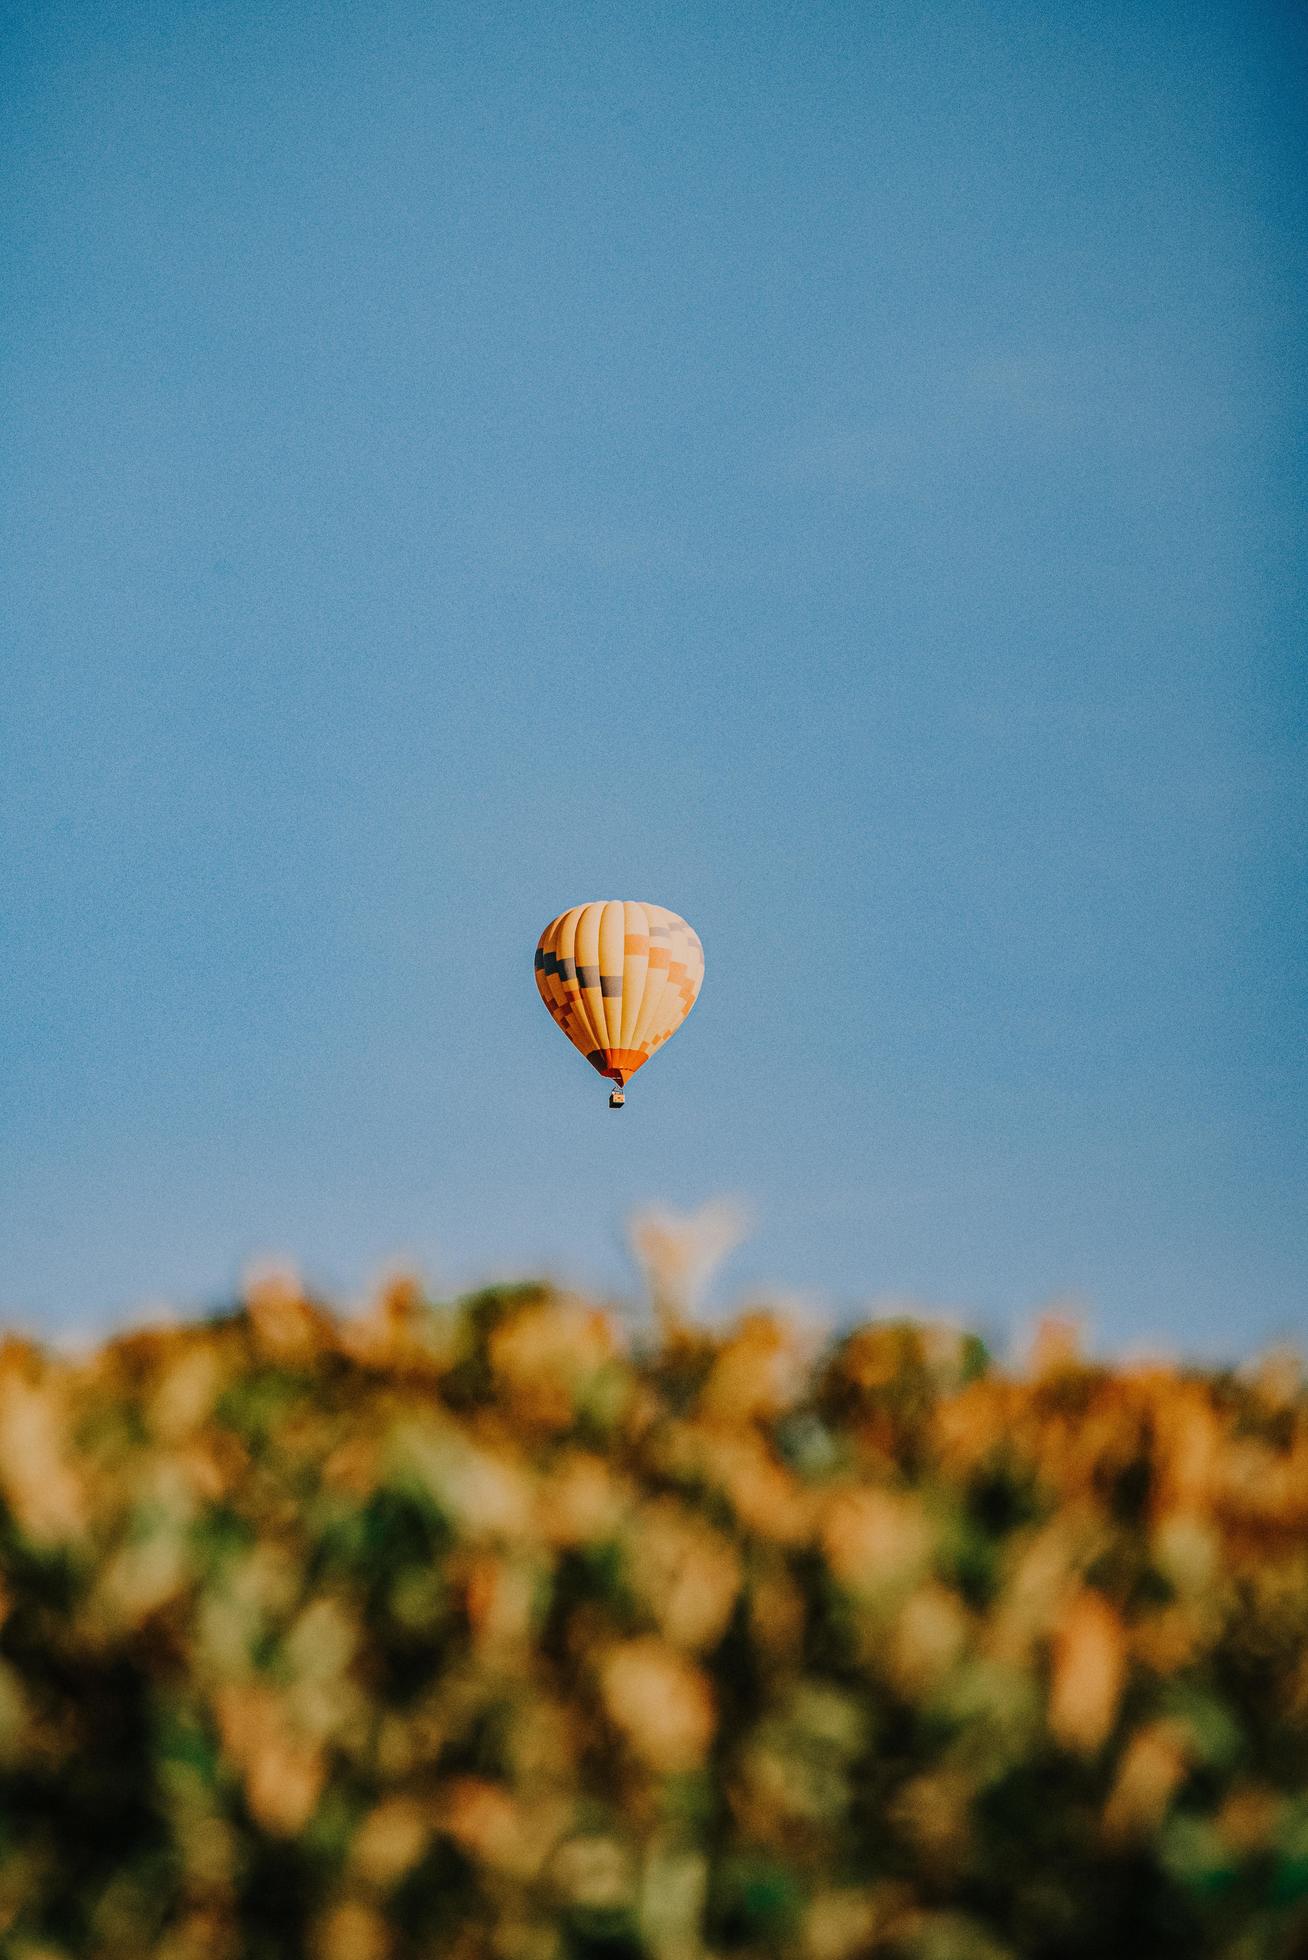 Hot air balloon in mid air under blue sky during daytime